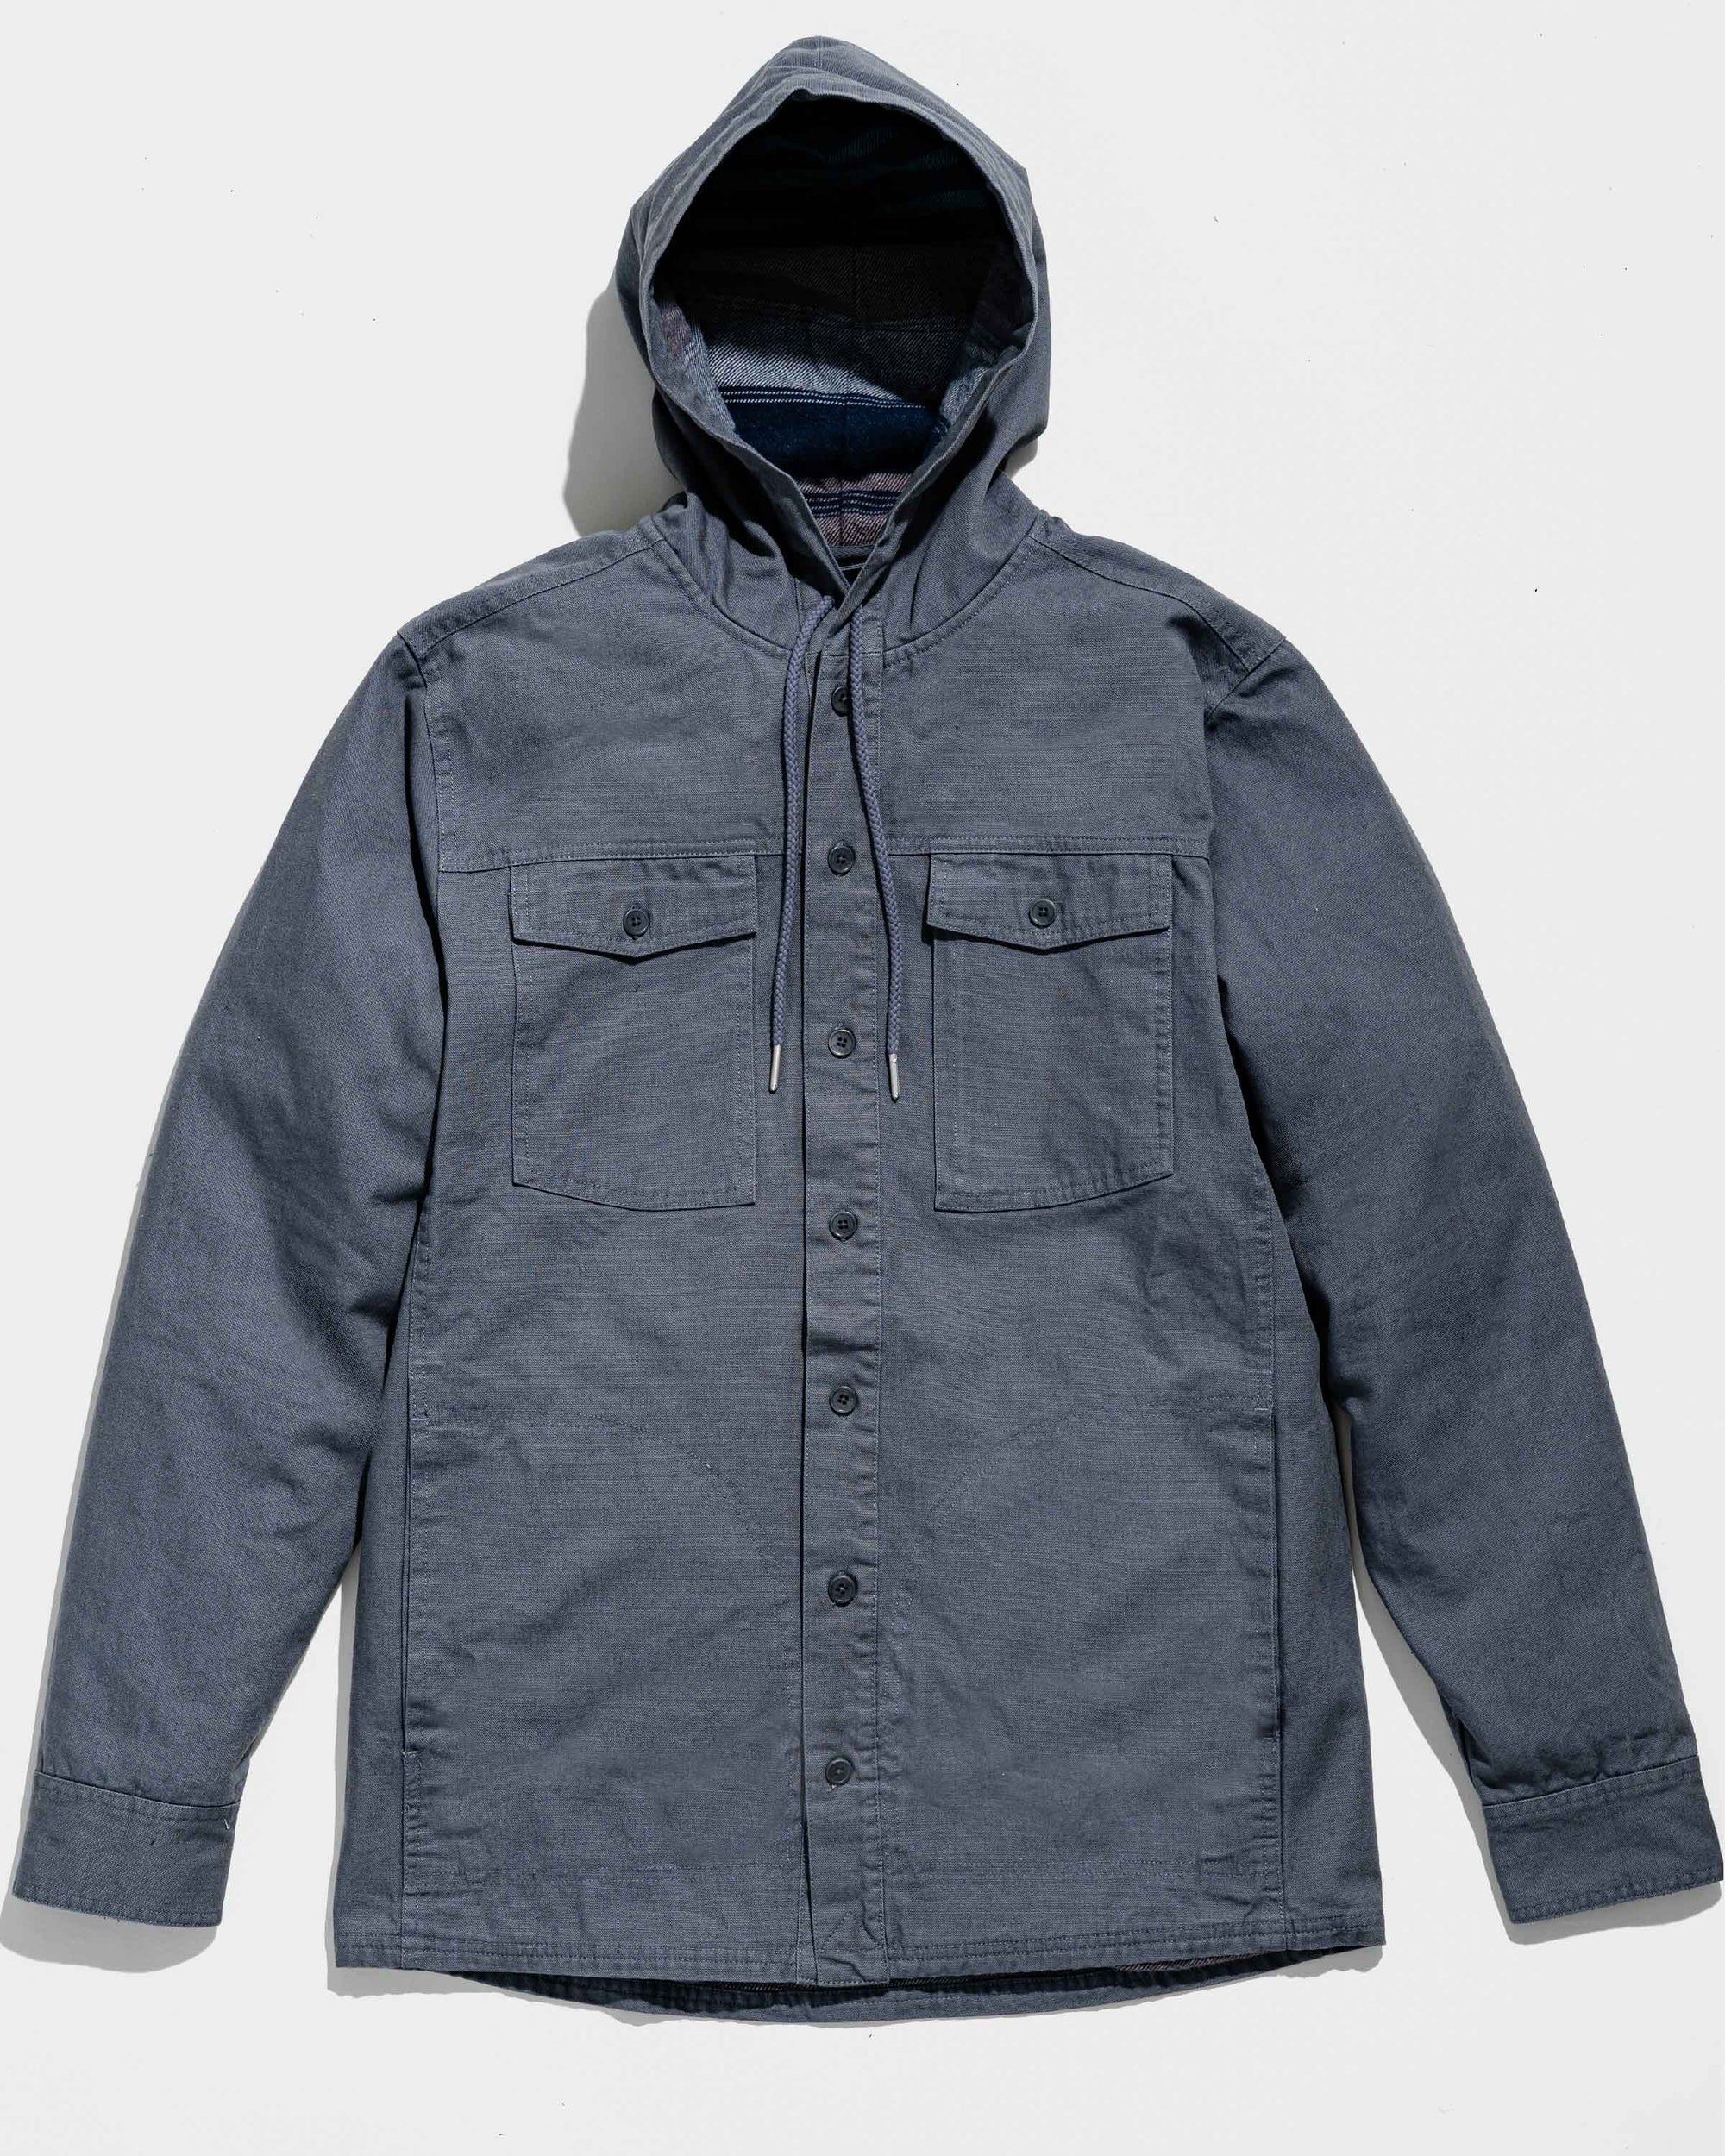 Men's Flannel-Lined Hooded Chore Coat